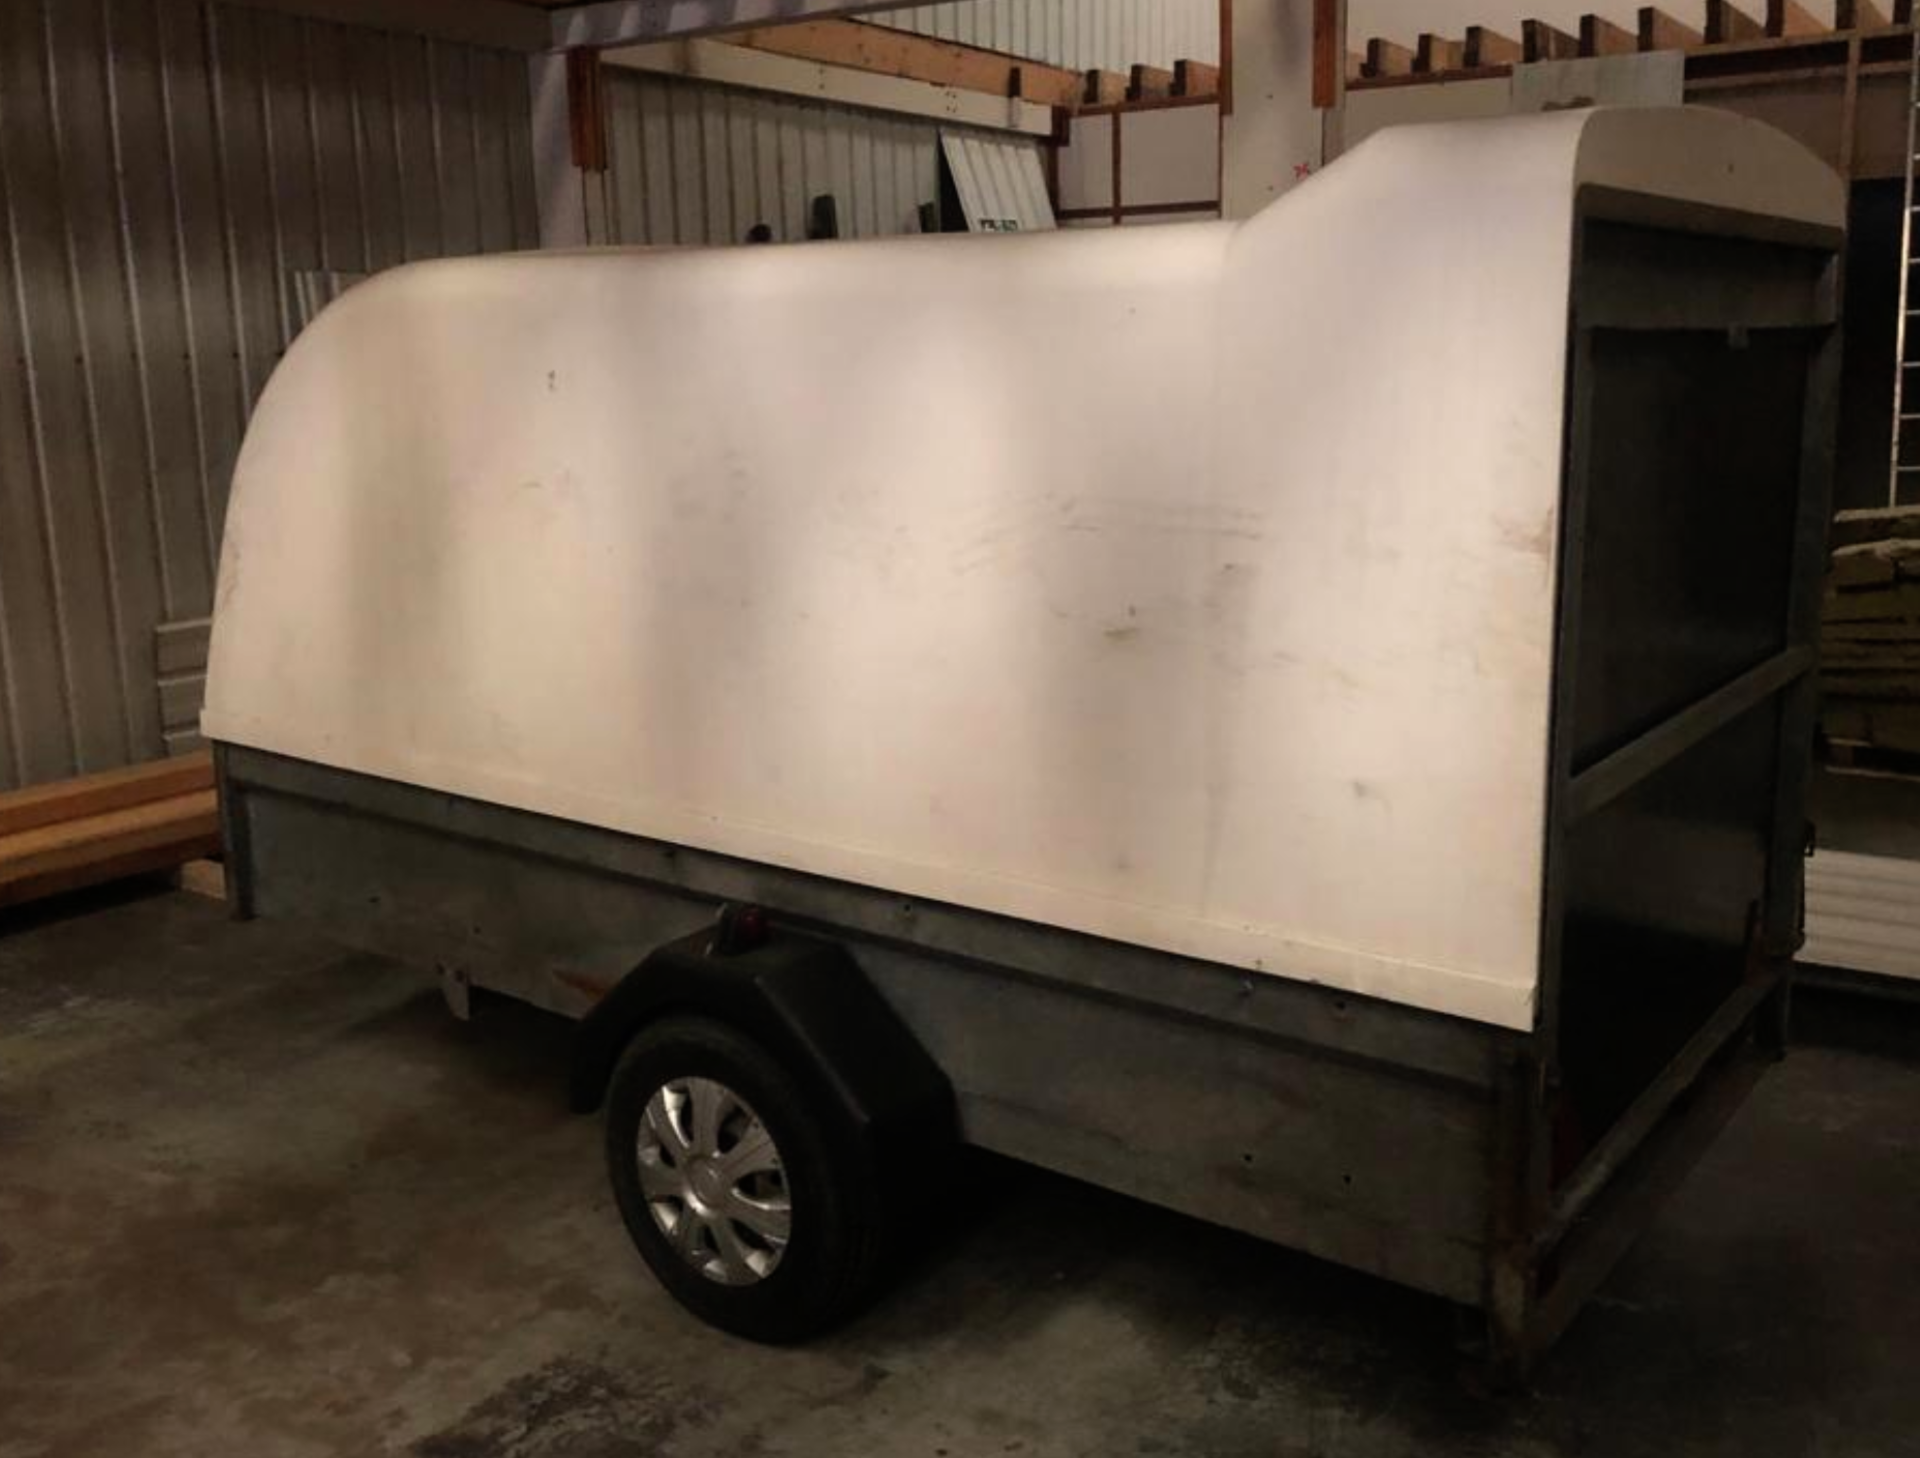 SPECIALIST SINGLE AXLE TOWABLE MOTORBIKE TRANSPORT COVERED TRAILER RAMP *PLUS VAT* - £1500 RESERVE! - Image 2 of 9